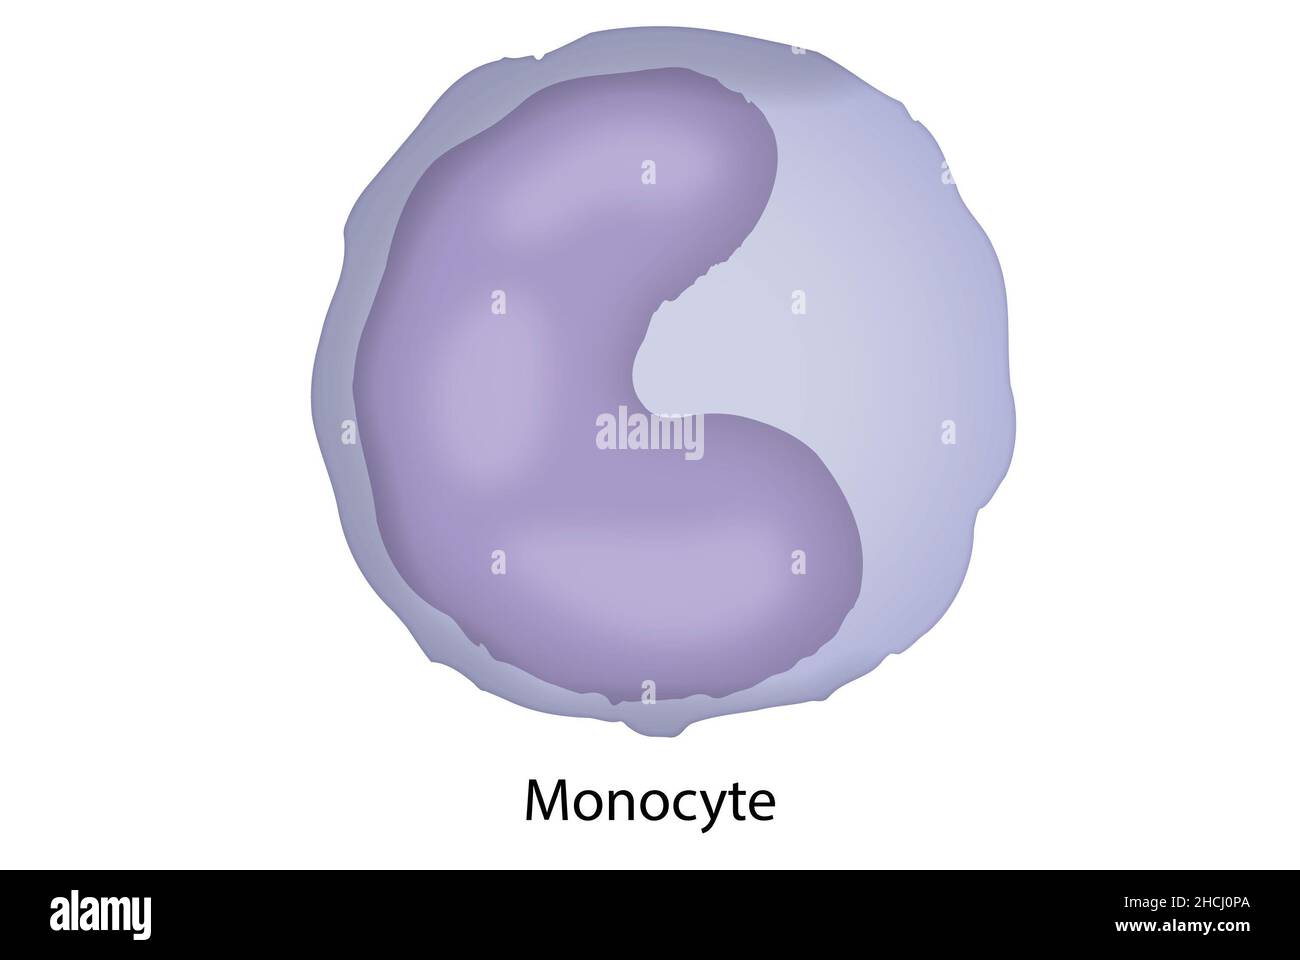 Monocyte, macrophage, cellular structure of the blood Stock Photo